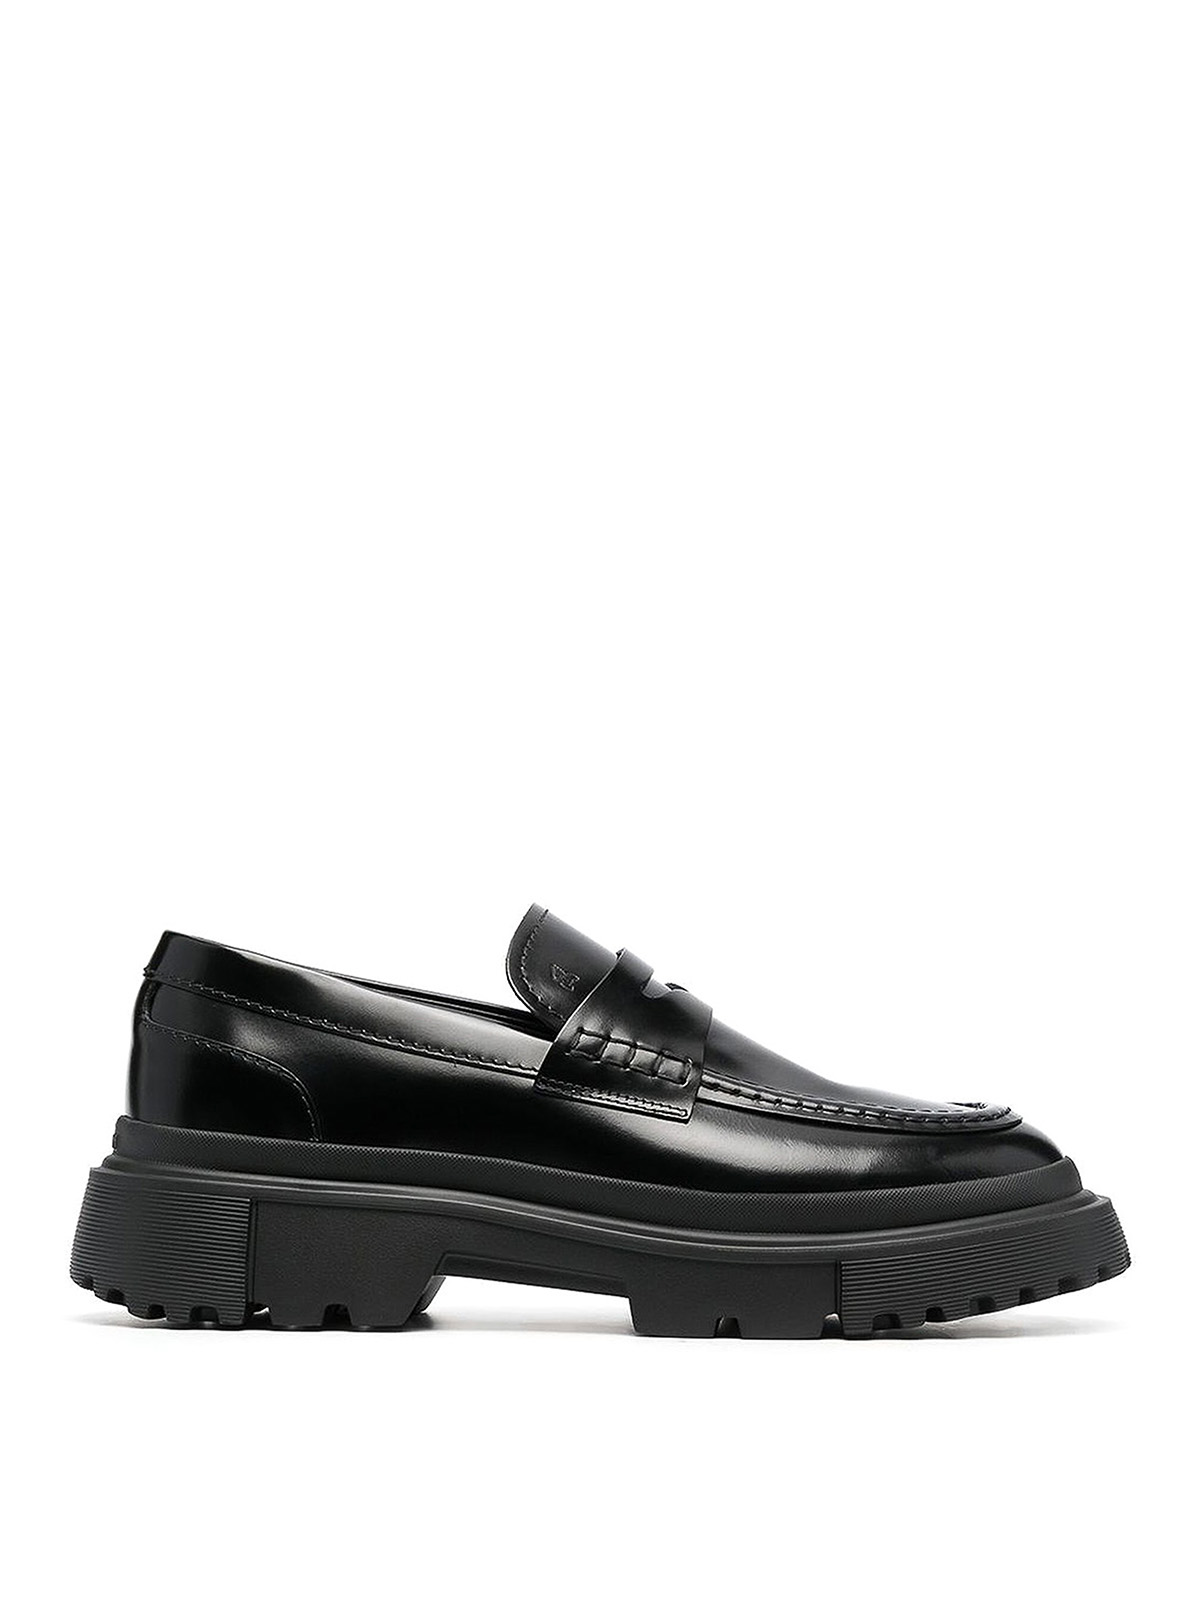 Loafers & Slippers Hogan - H629 leather loafers - HXM6290EP107J7B999